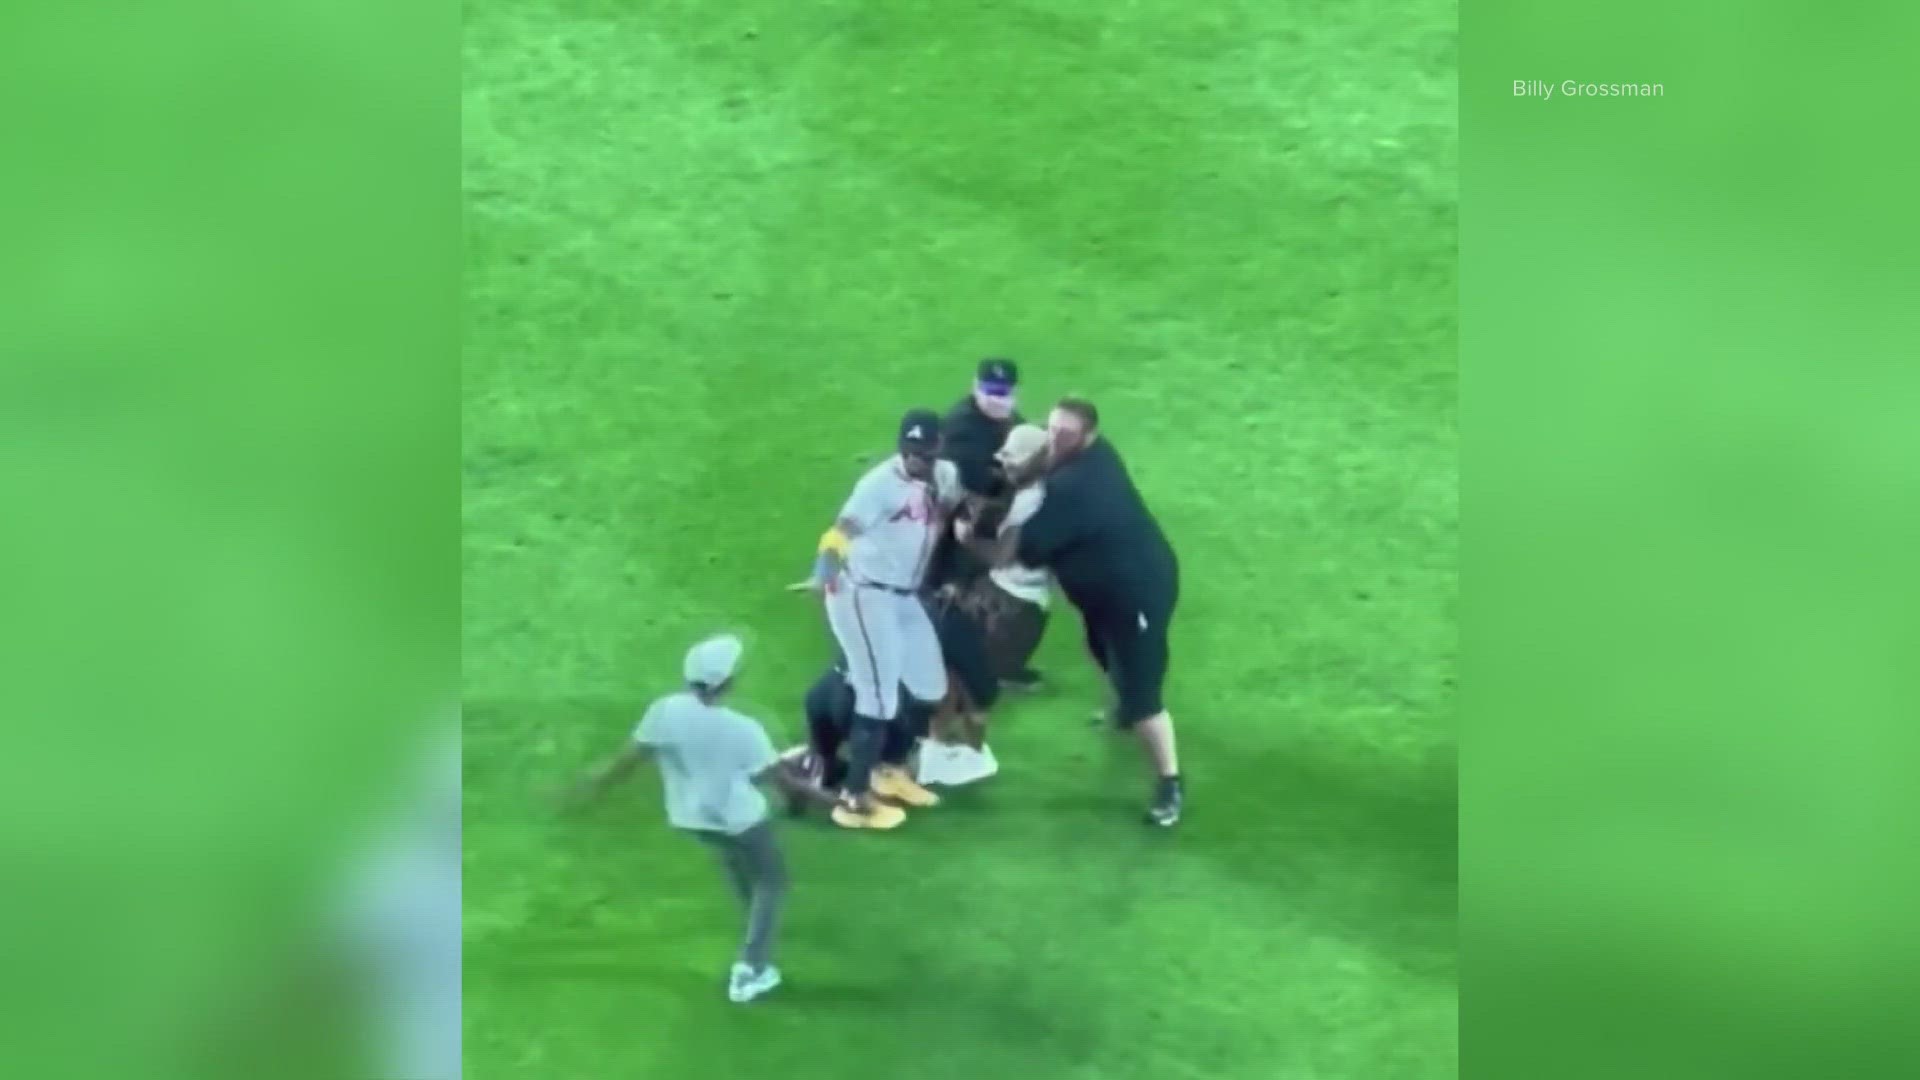 Ronald Acuña Jr. said he was OK after fending off the fans, including one who knocked him over in right field during the Atlanta Braves' 14-4 win over the Rockies.